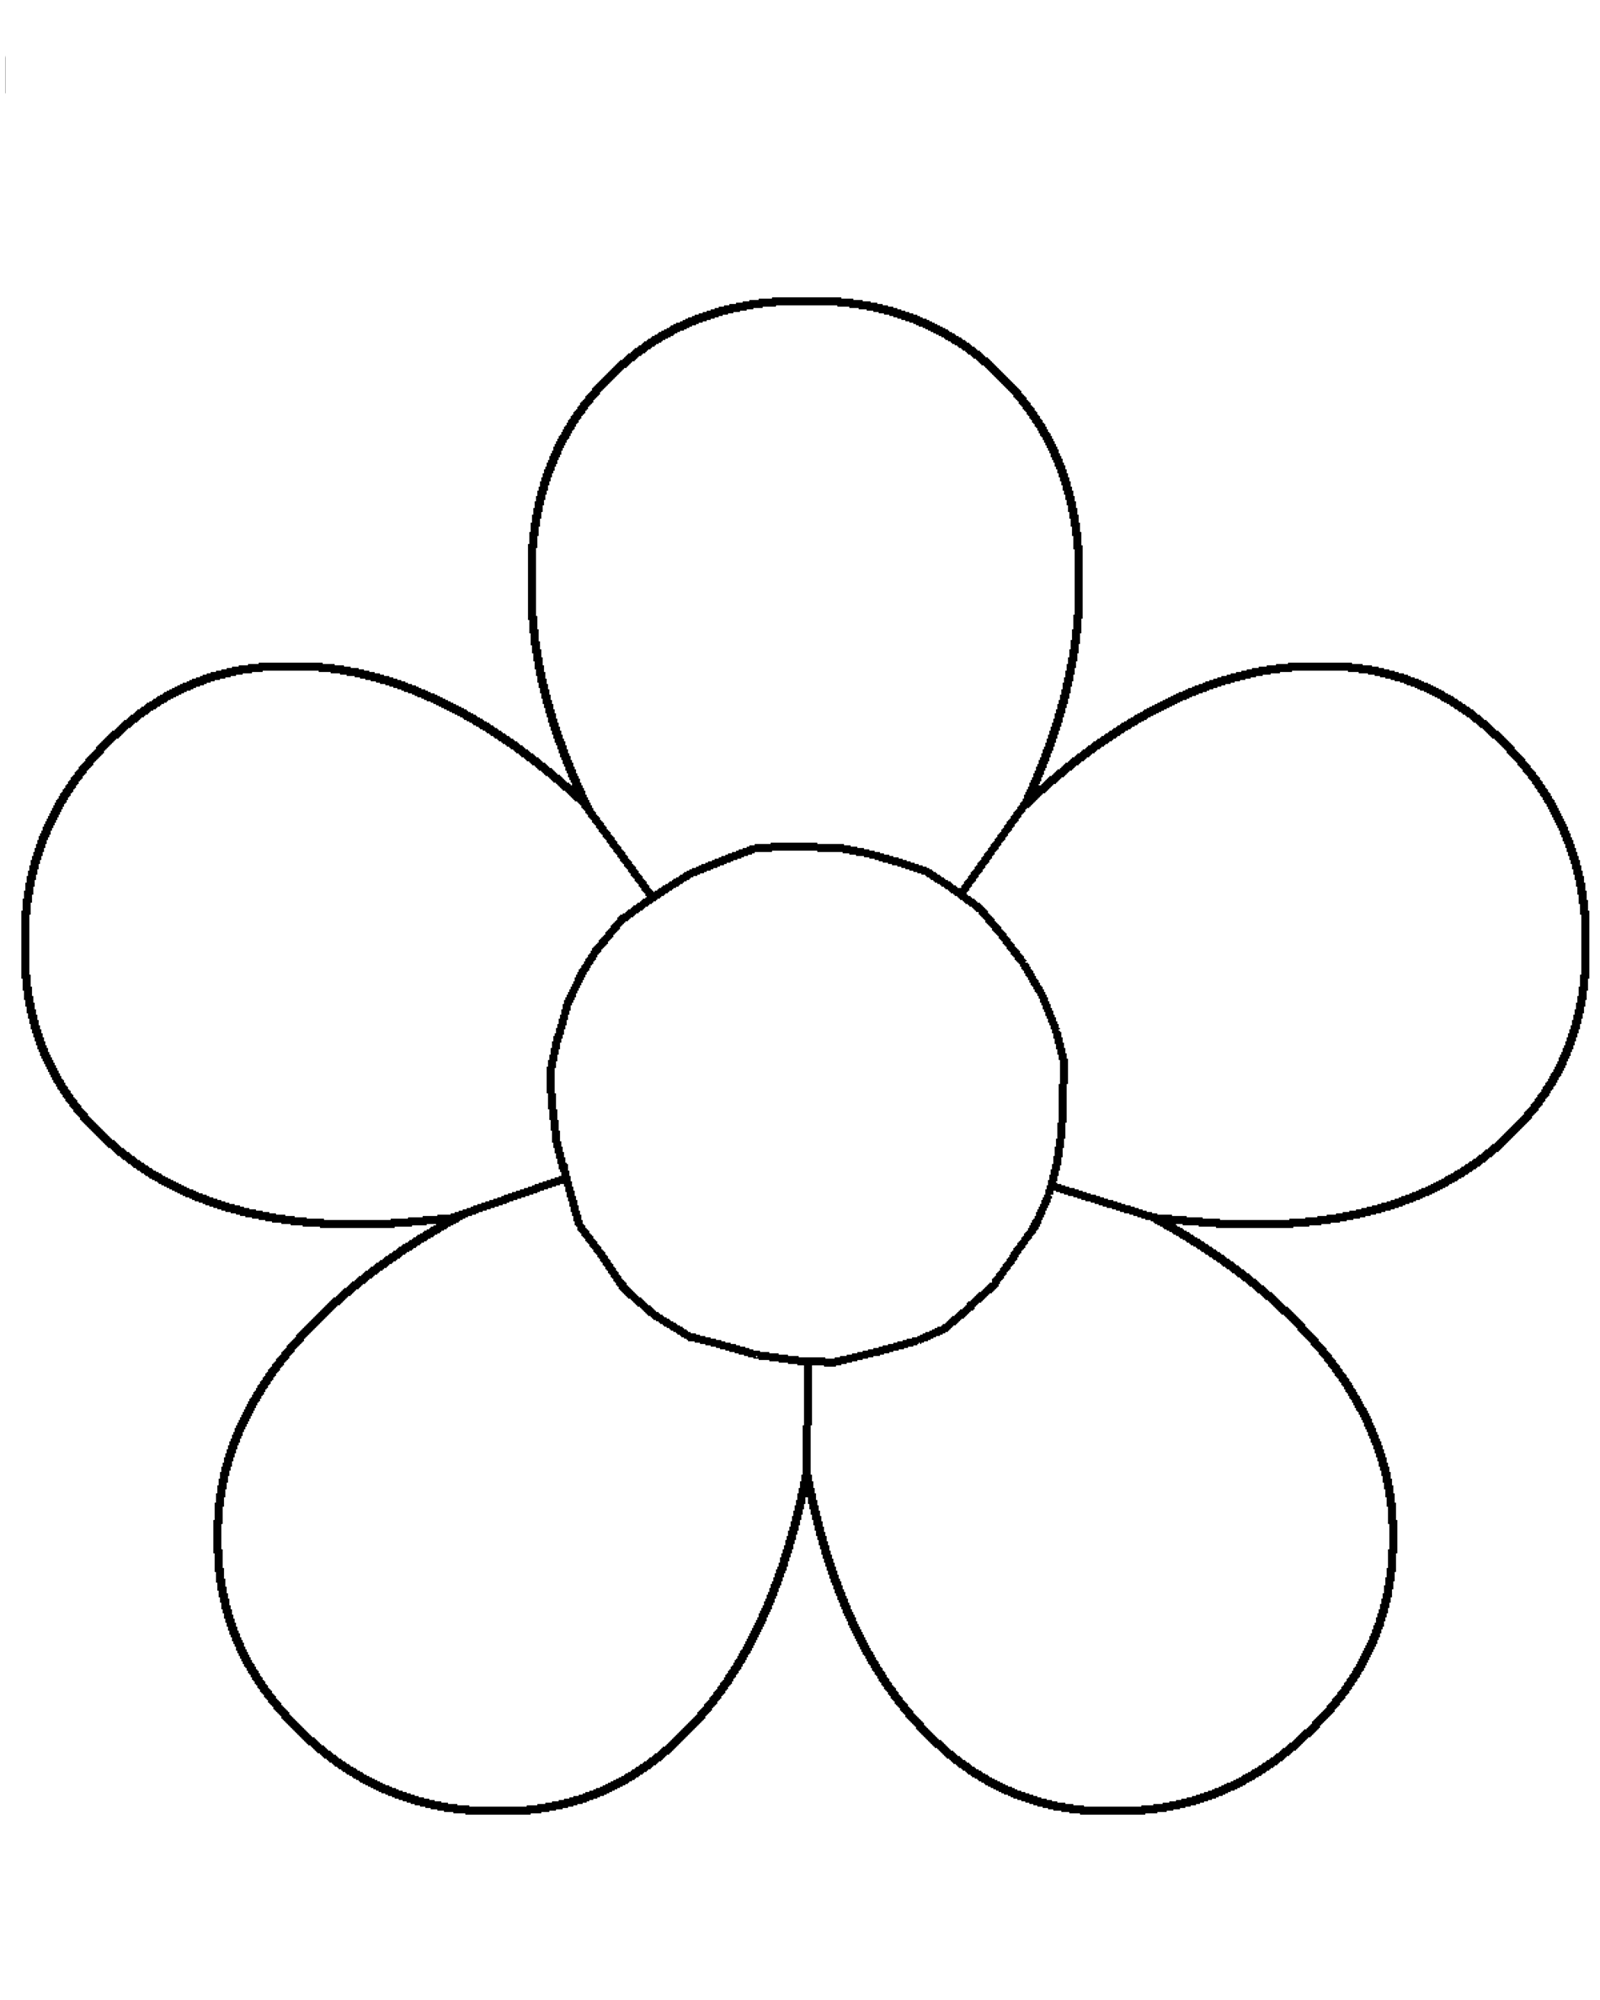 Flower Outline Coloring Page ~ Coloring Print